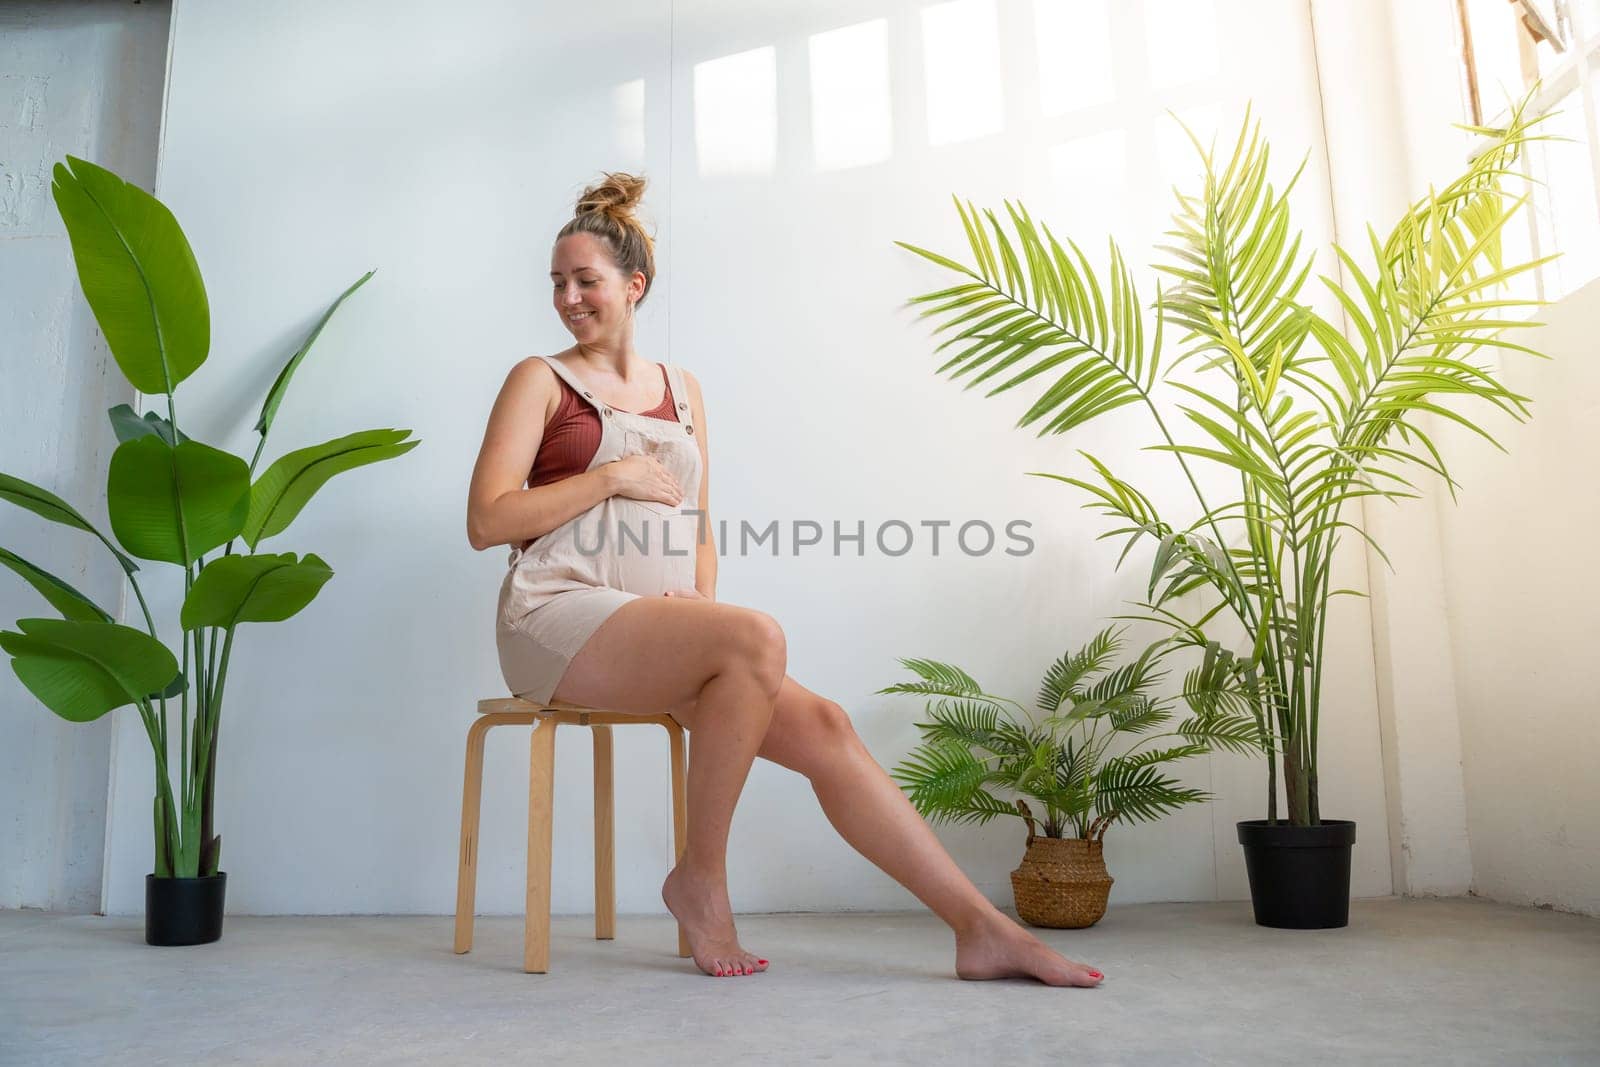 Happy pregnant women touching her belly relaxed on a chair between indoor plants. by PaulCarr